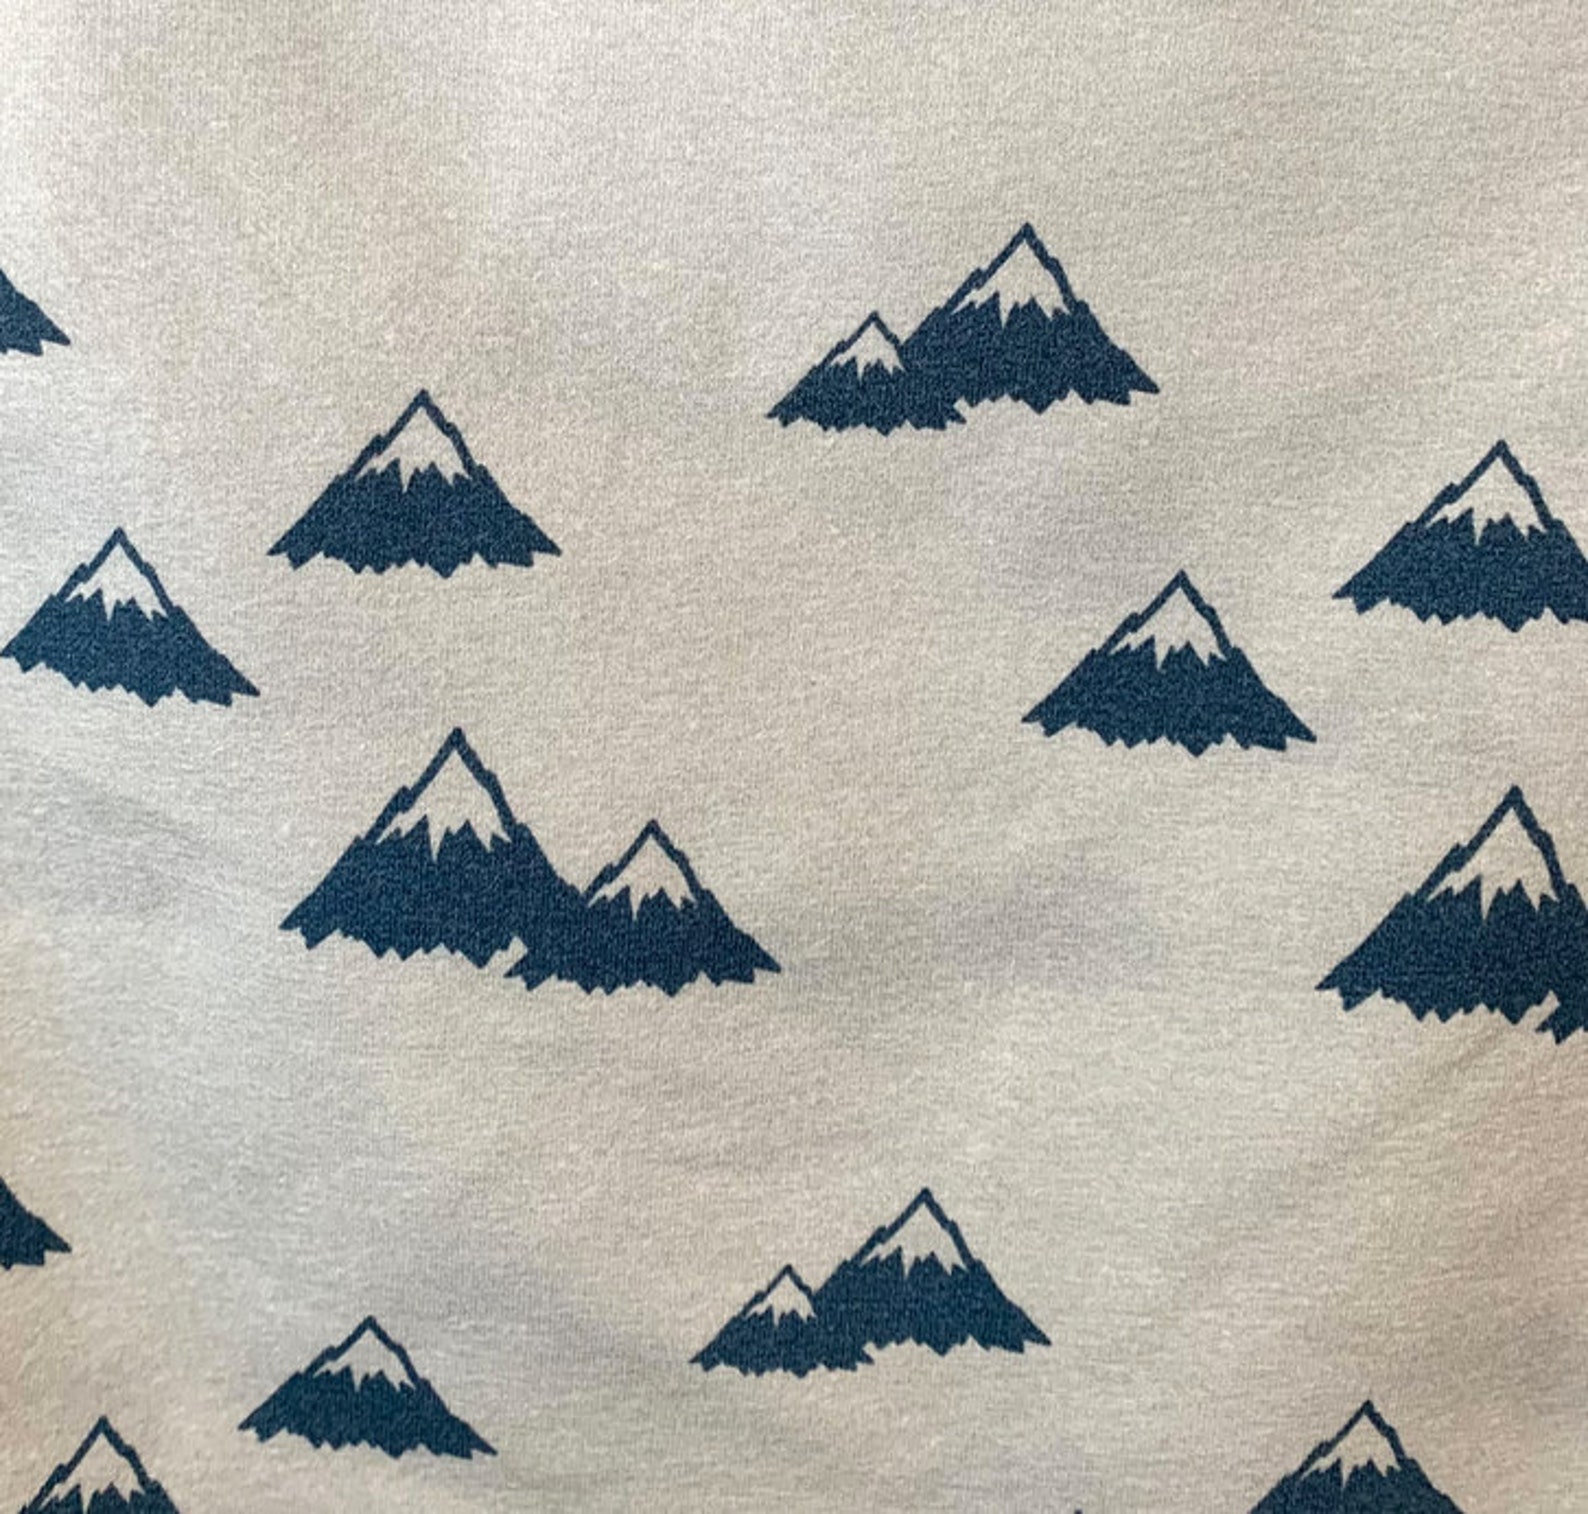 Little arrow deign grey and navy mountain jersey knit fabric | Etsy